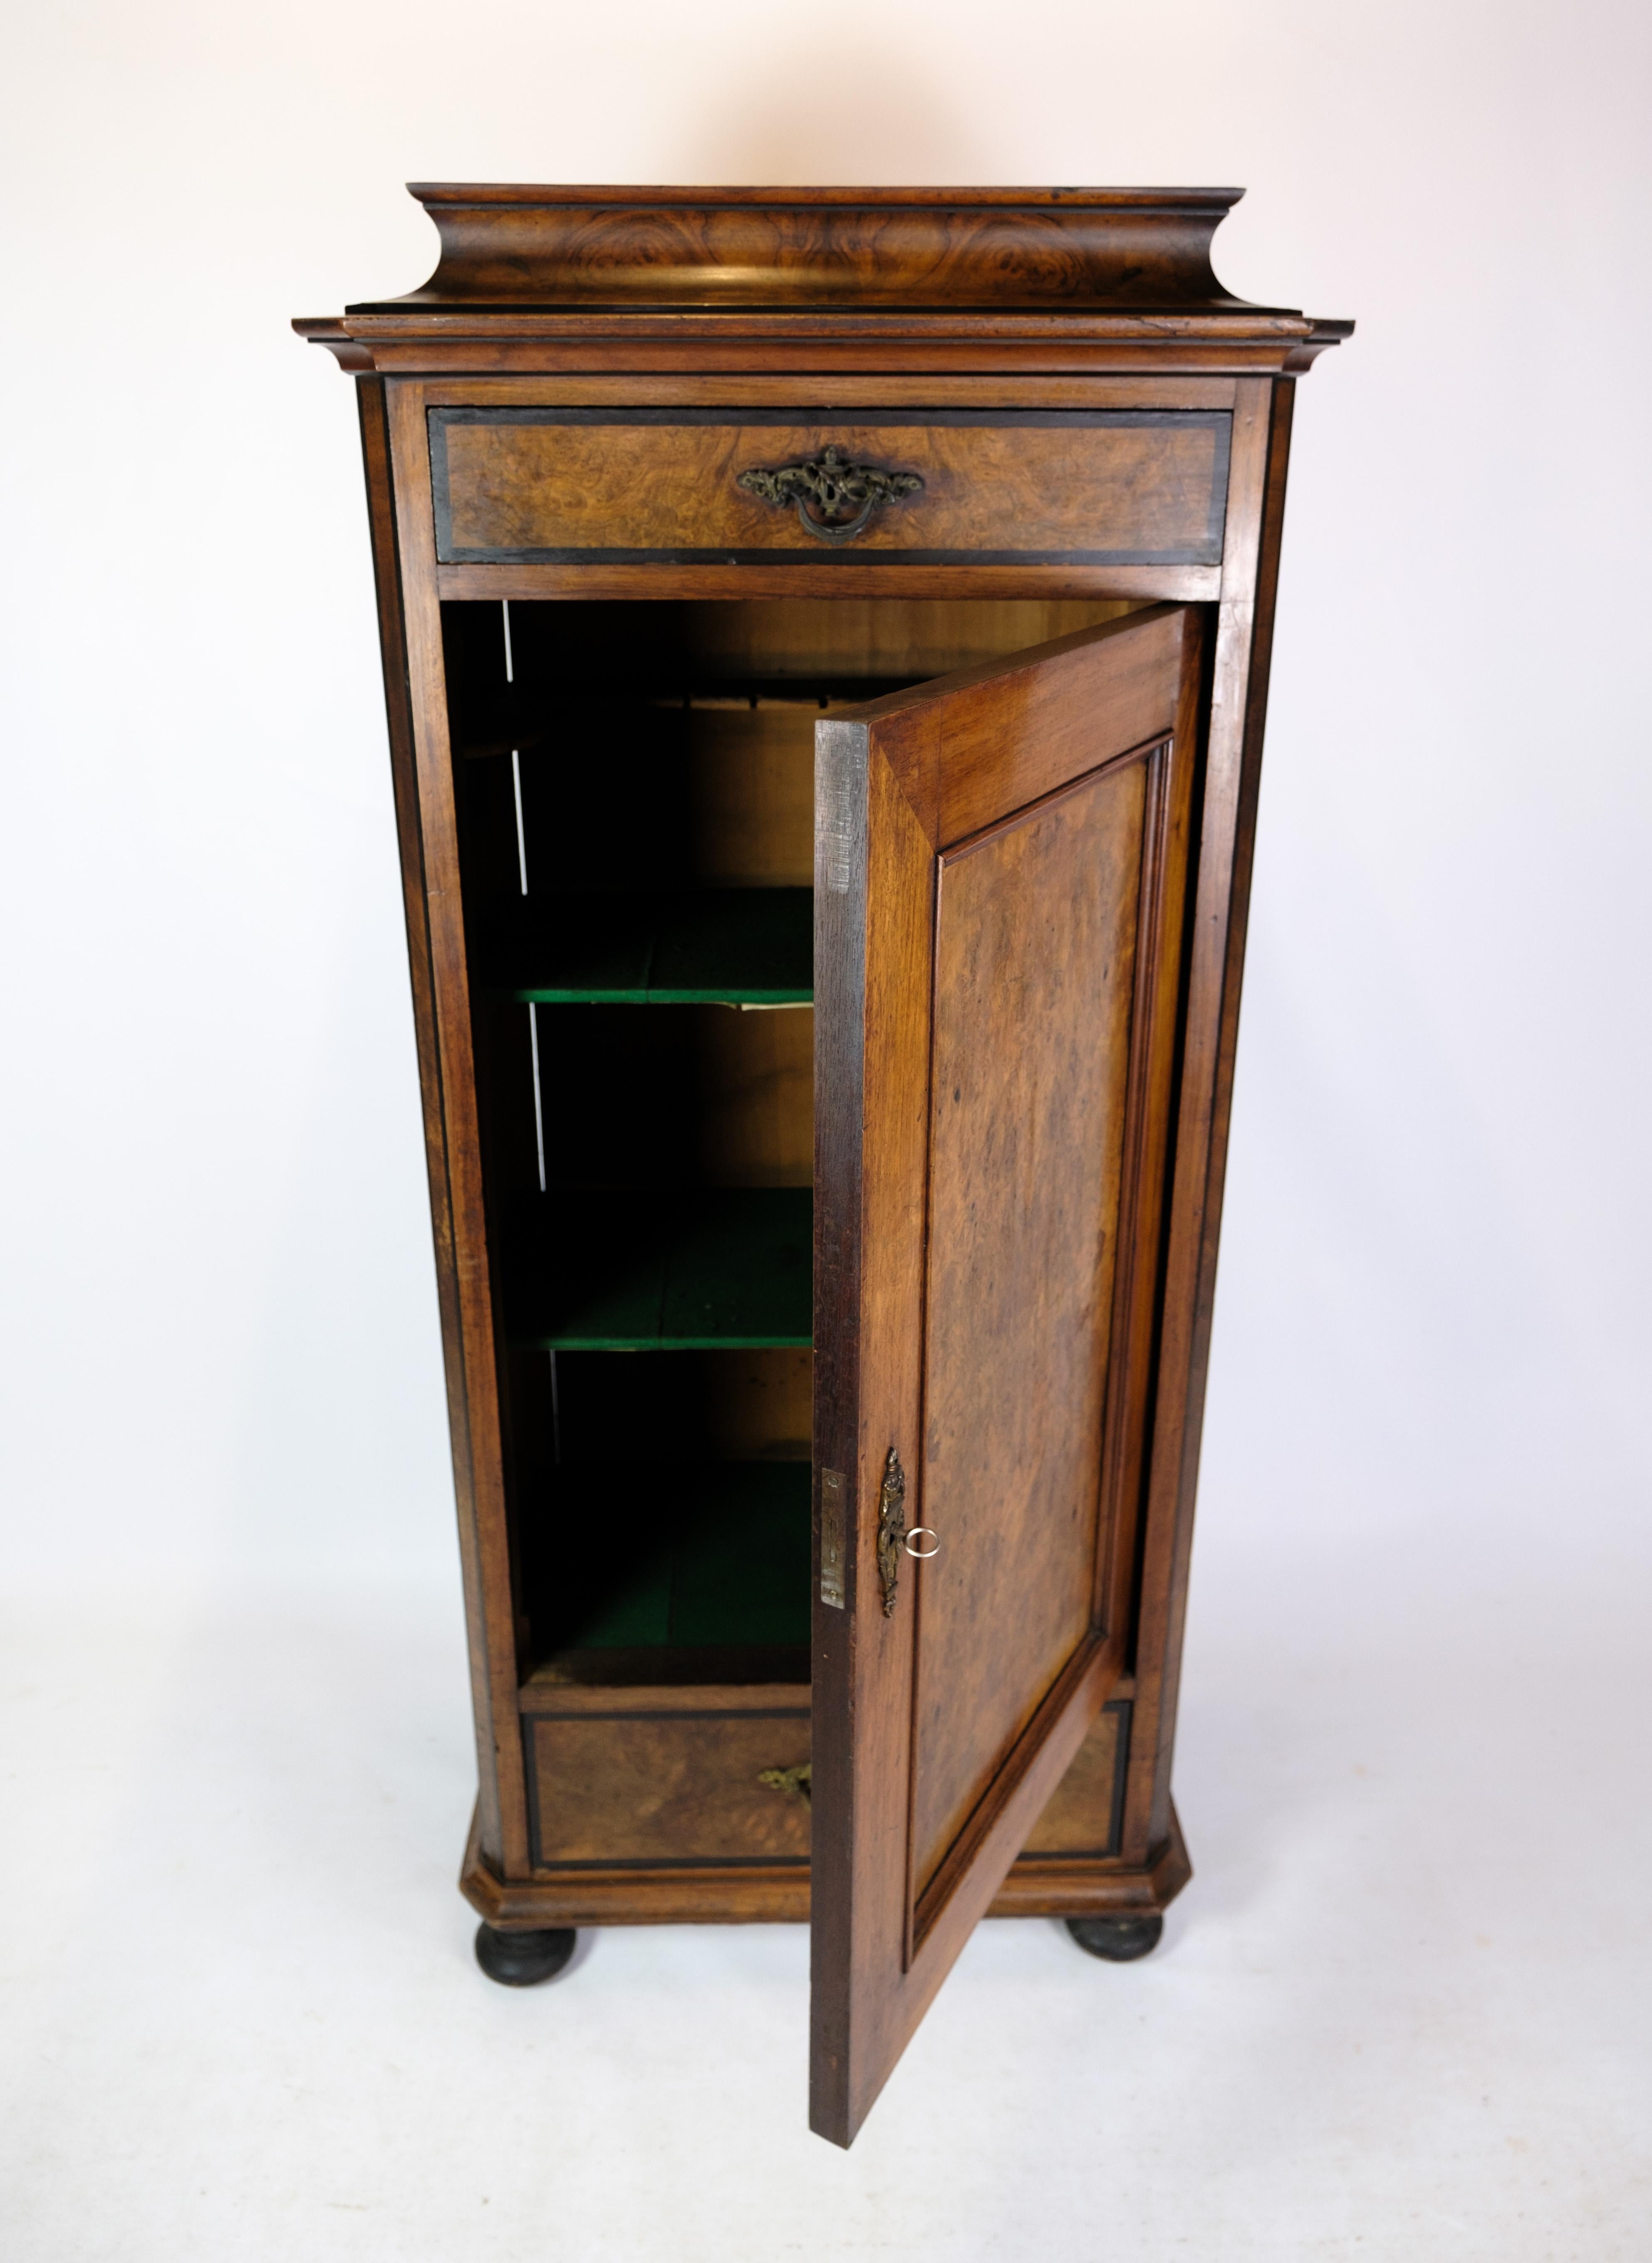 Tall cabinet of walnut, in great antique condition from the 1850s.
H - 155 cm, W - 65 cm and D - 39 cm.